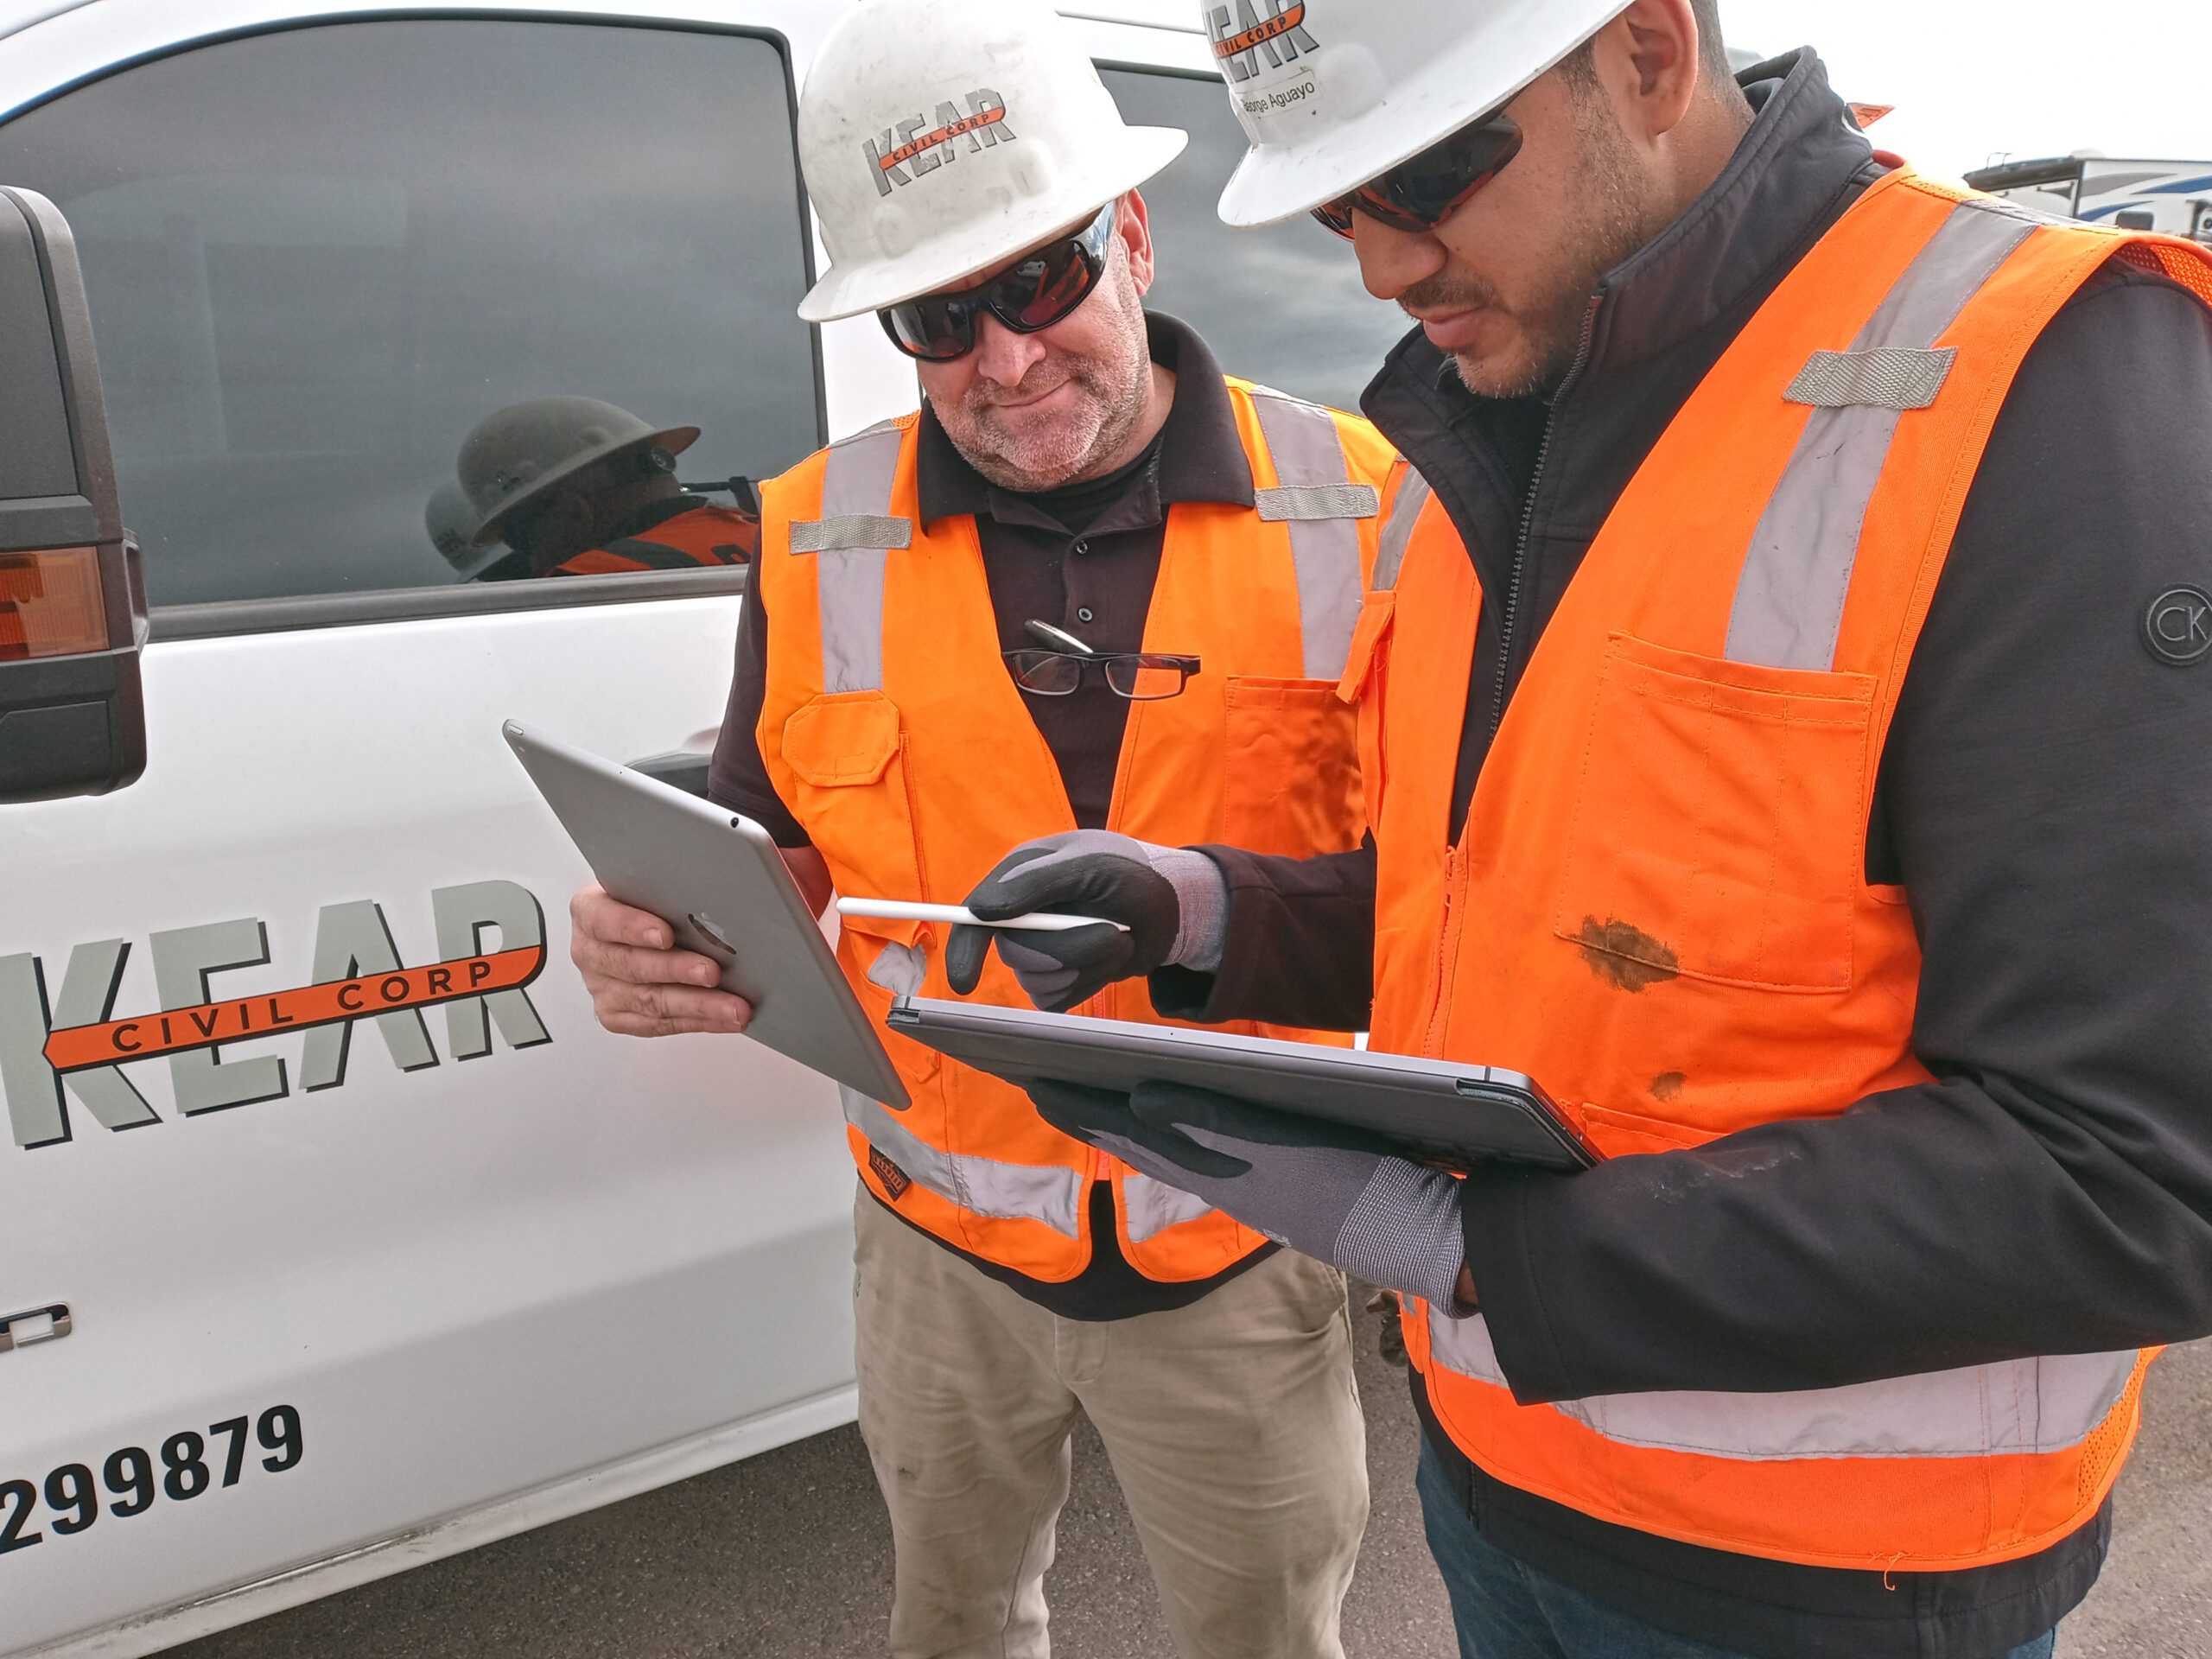 Two construction workers in orange vests and helmets looking at a tablet near a home improvement company van.